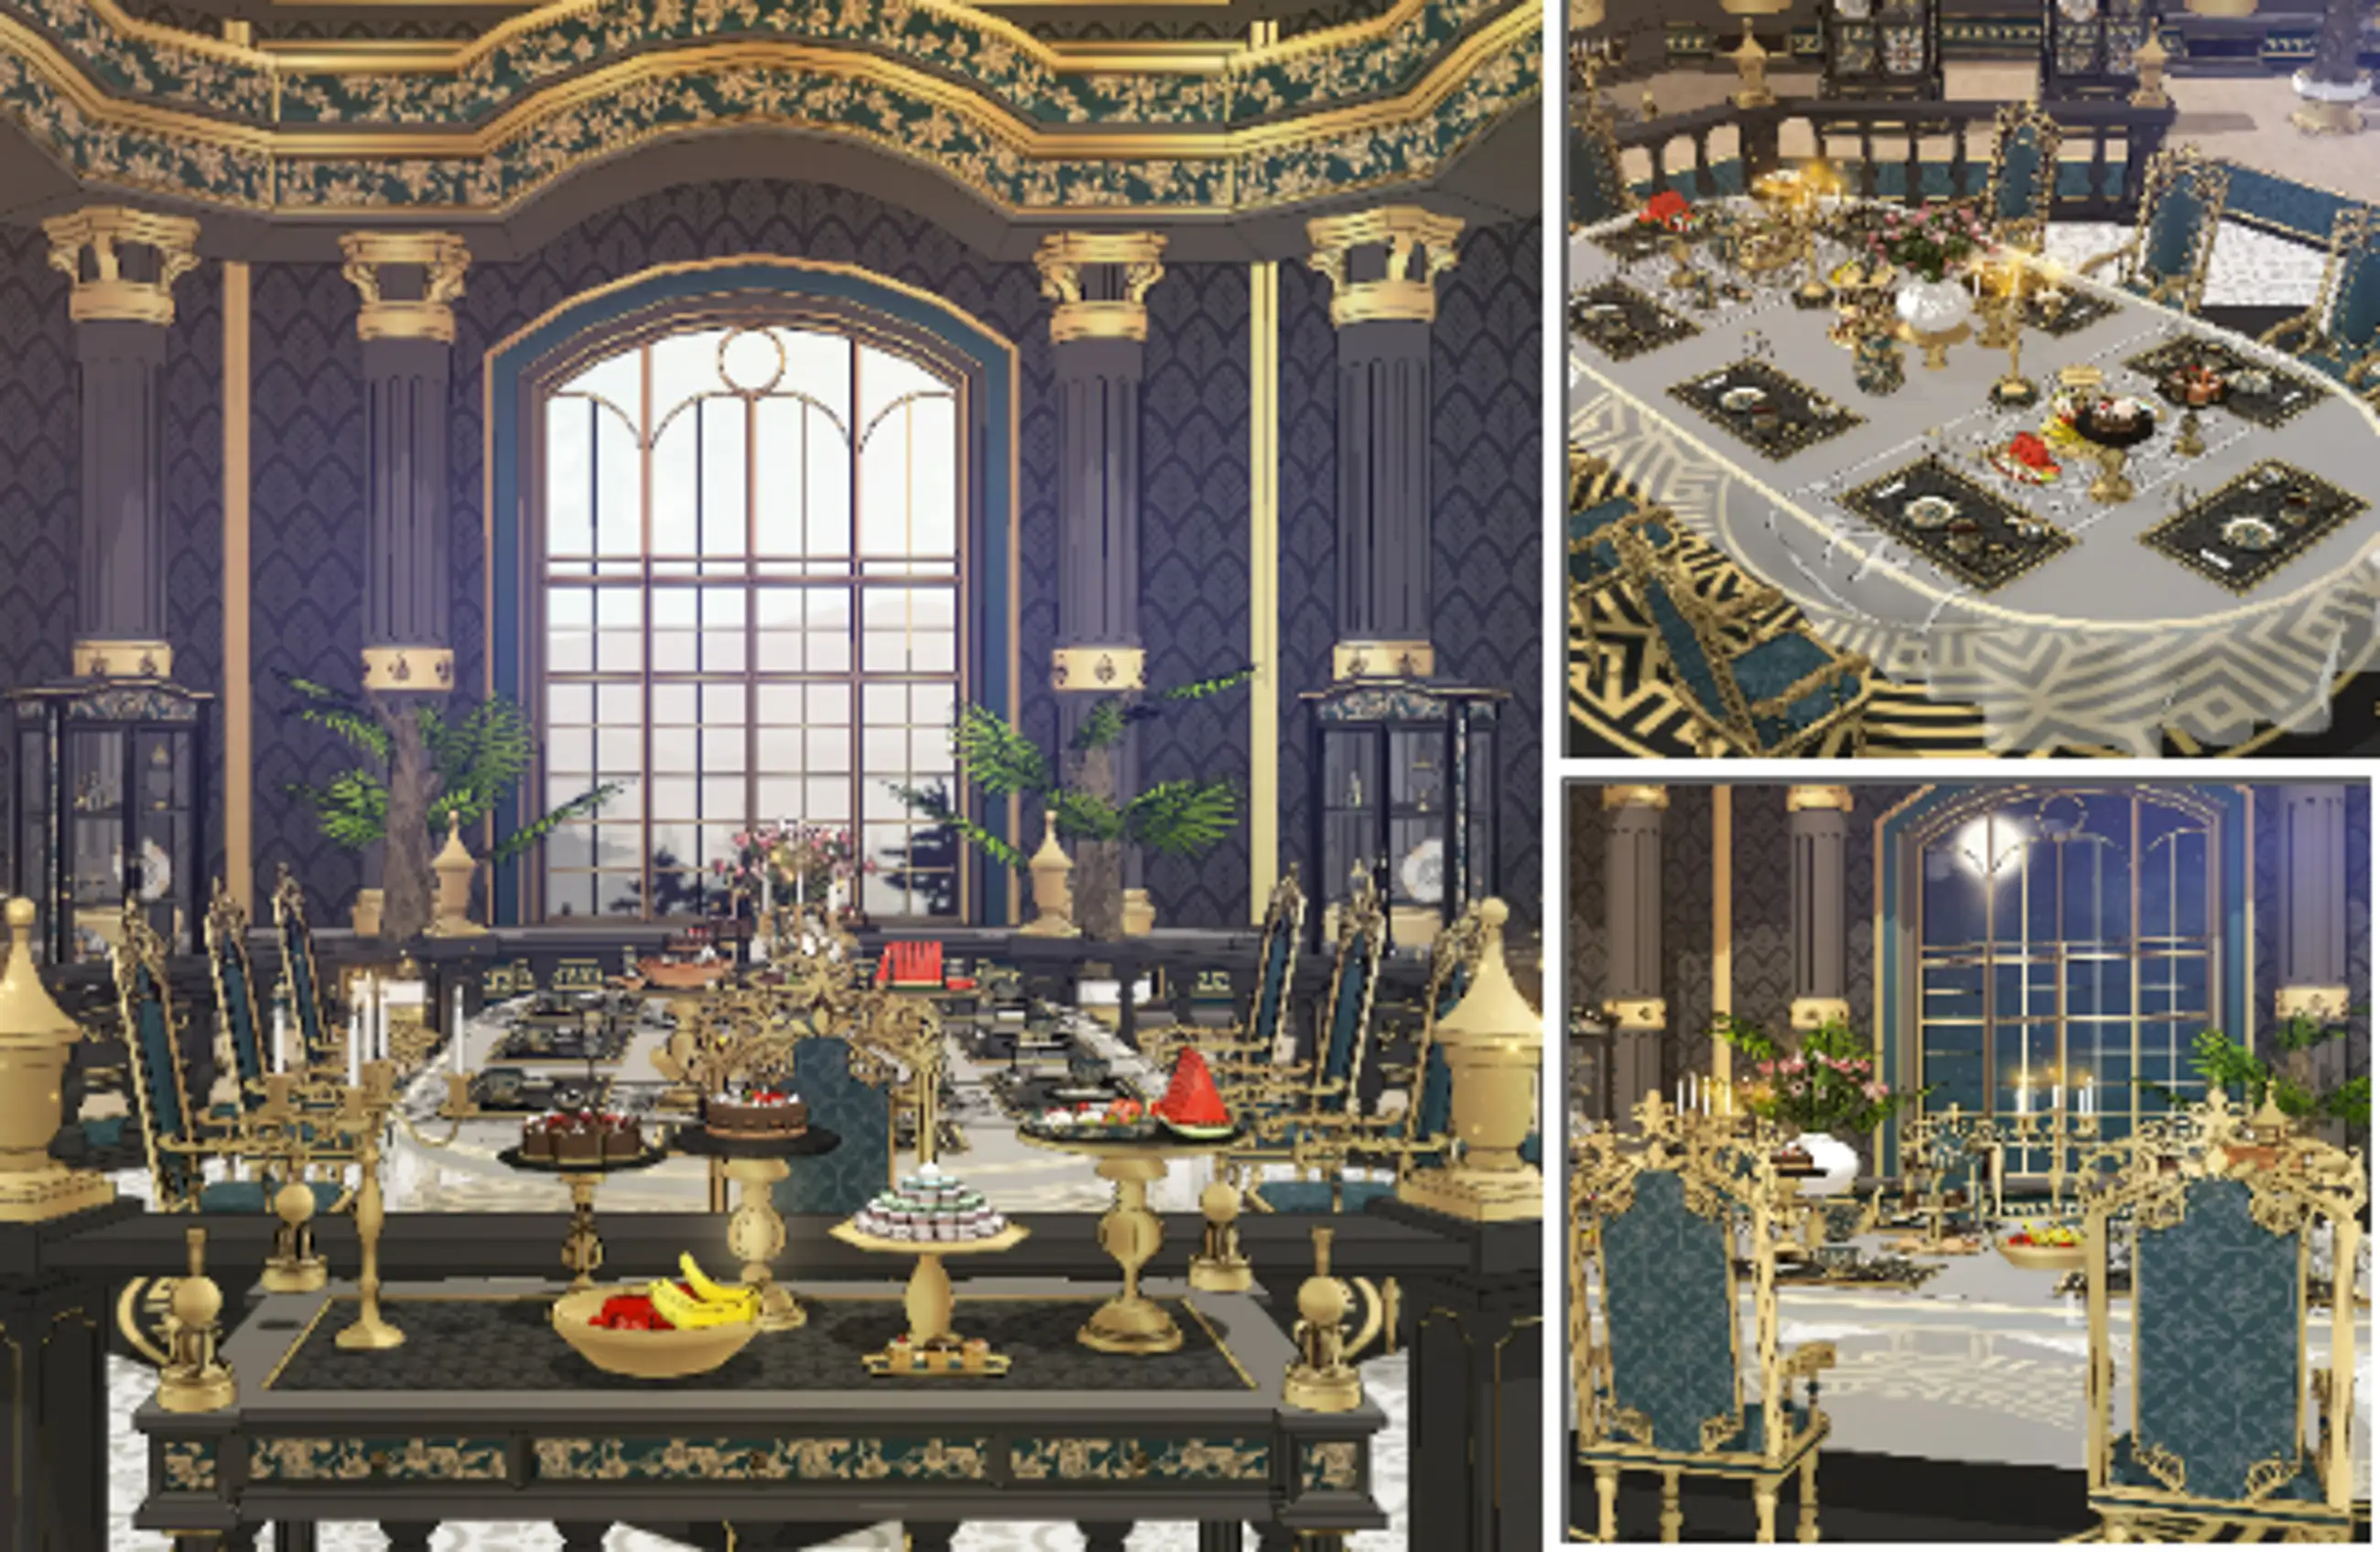 Black & Gold Lofan mansion that reminds me more and more - Tea Room